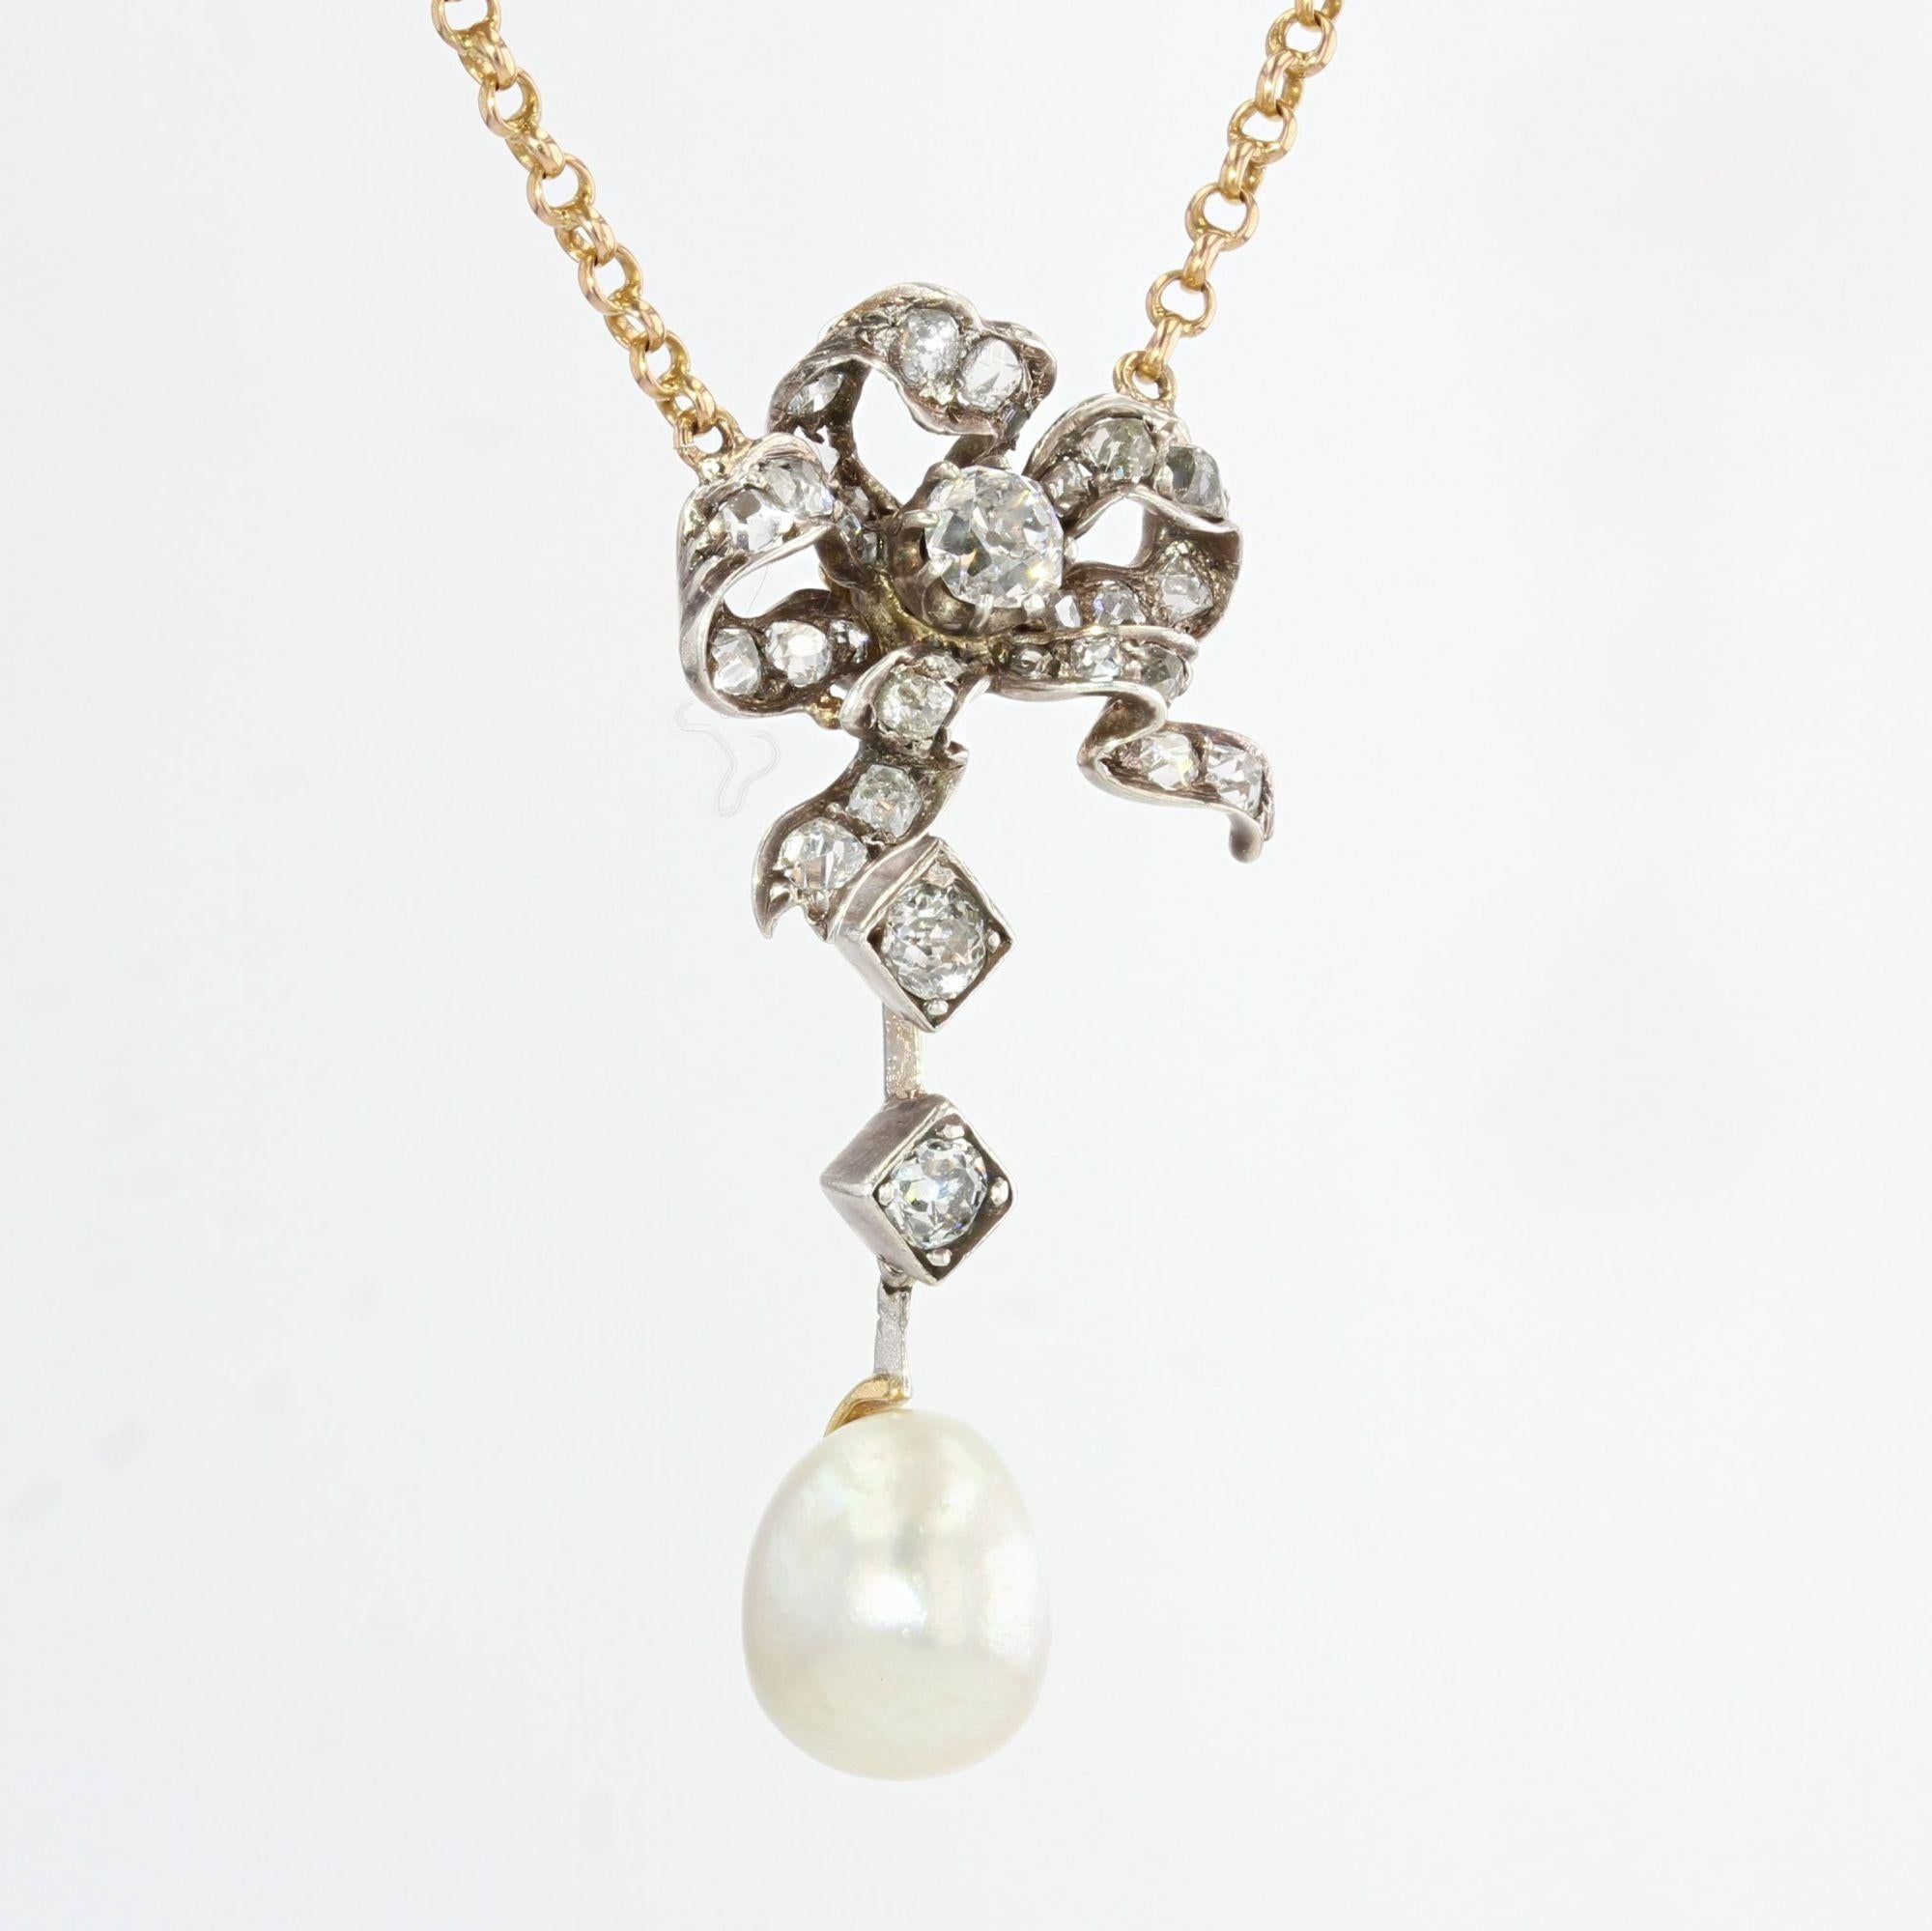 Belle Époque 19th Century Diamond Knot Certified Natural Pearl 18 Karat Yellow Gold Necklace For Sale